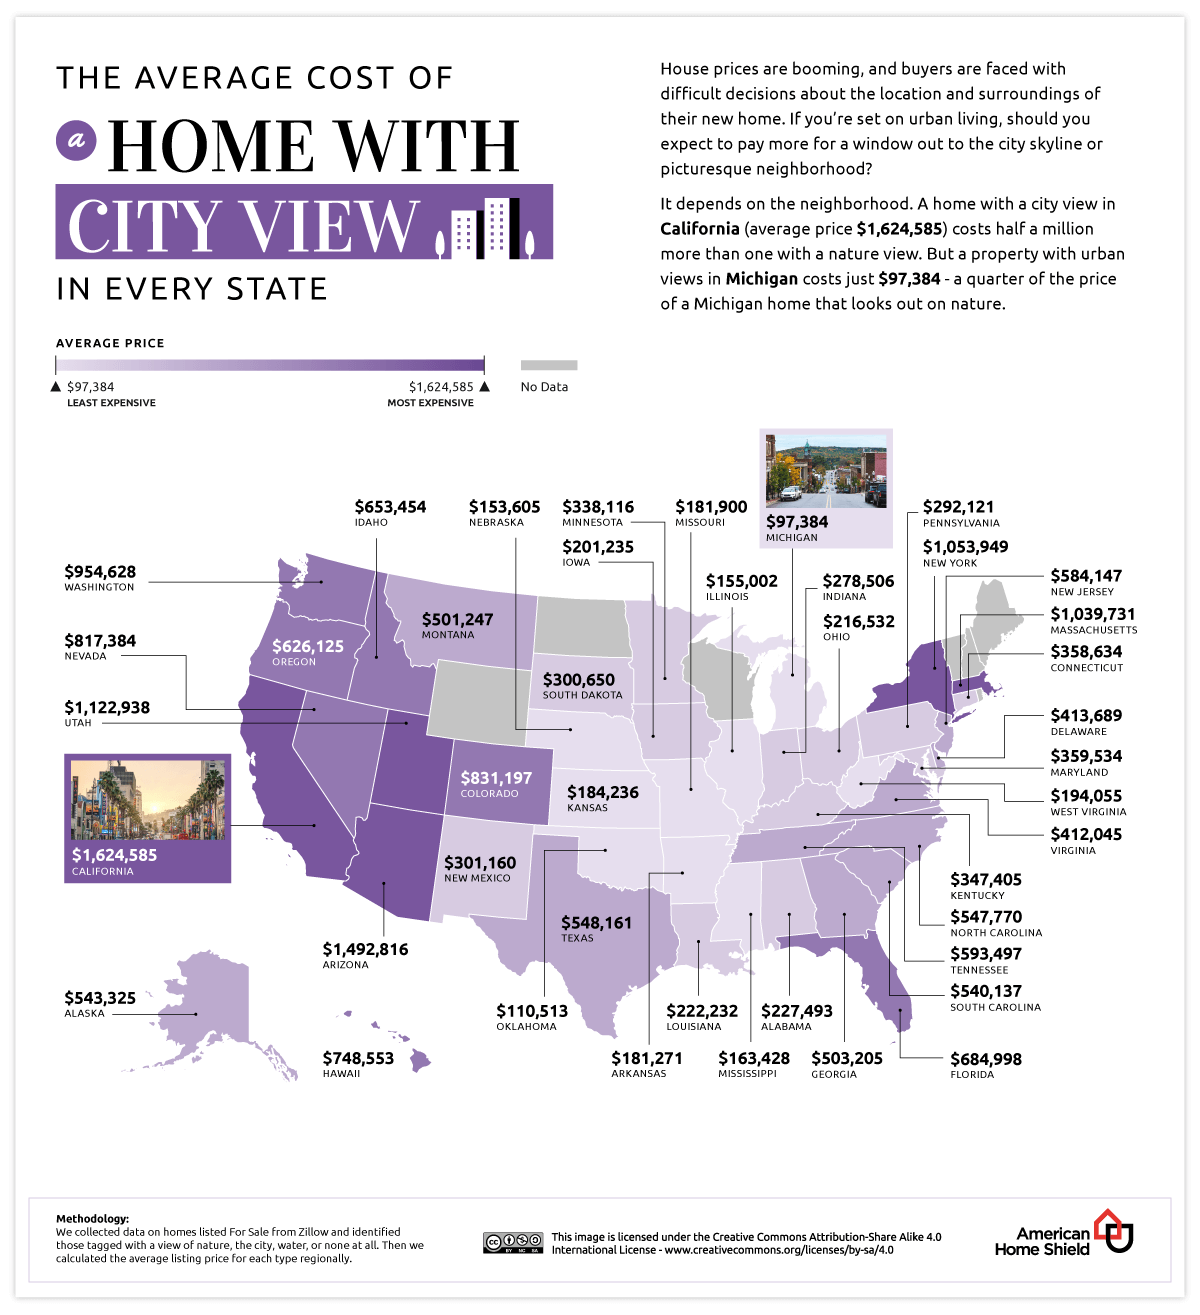 Average Cost of Homes with a City View